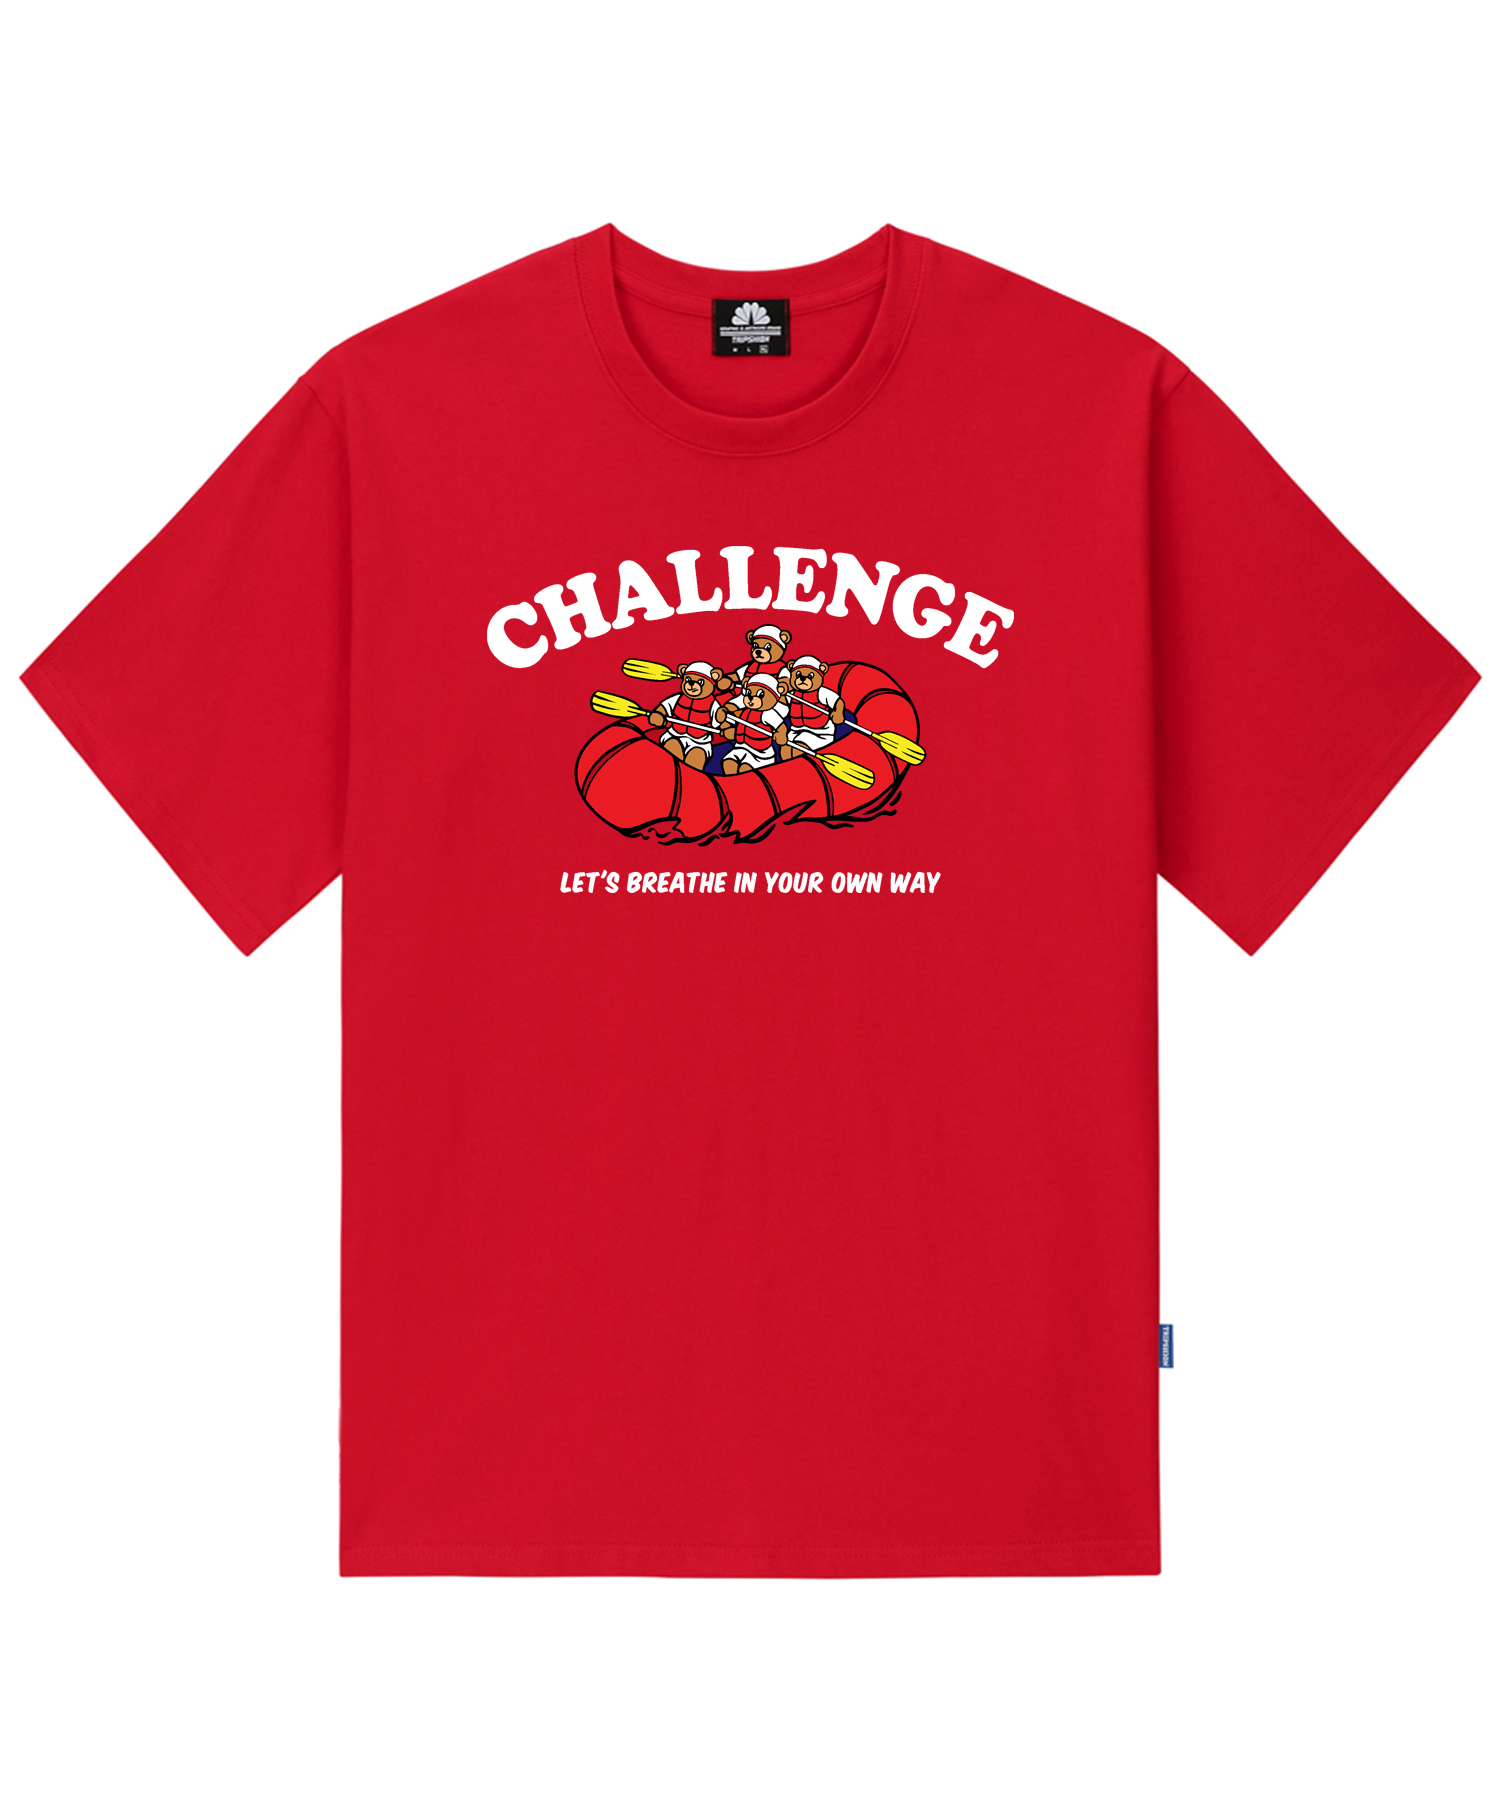 CHALLENGE BOAT BEAR GRAPHIC T-SHIRTS - RED